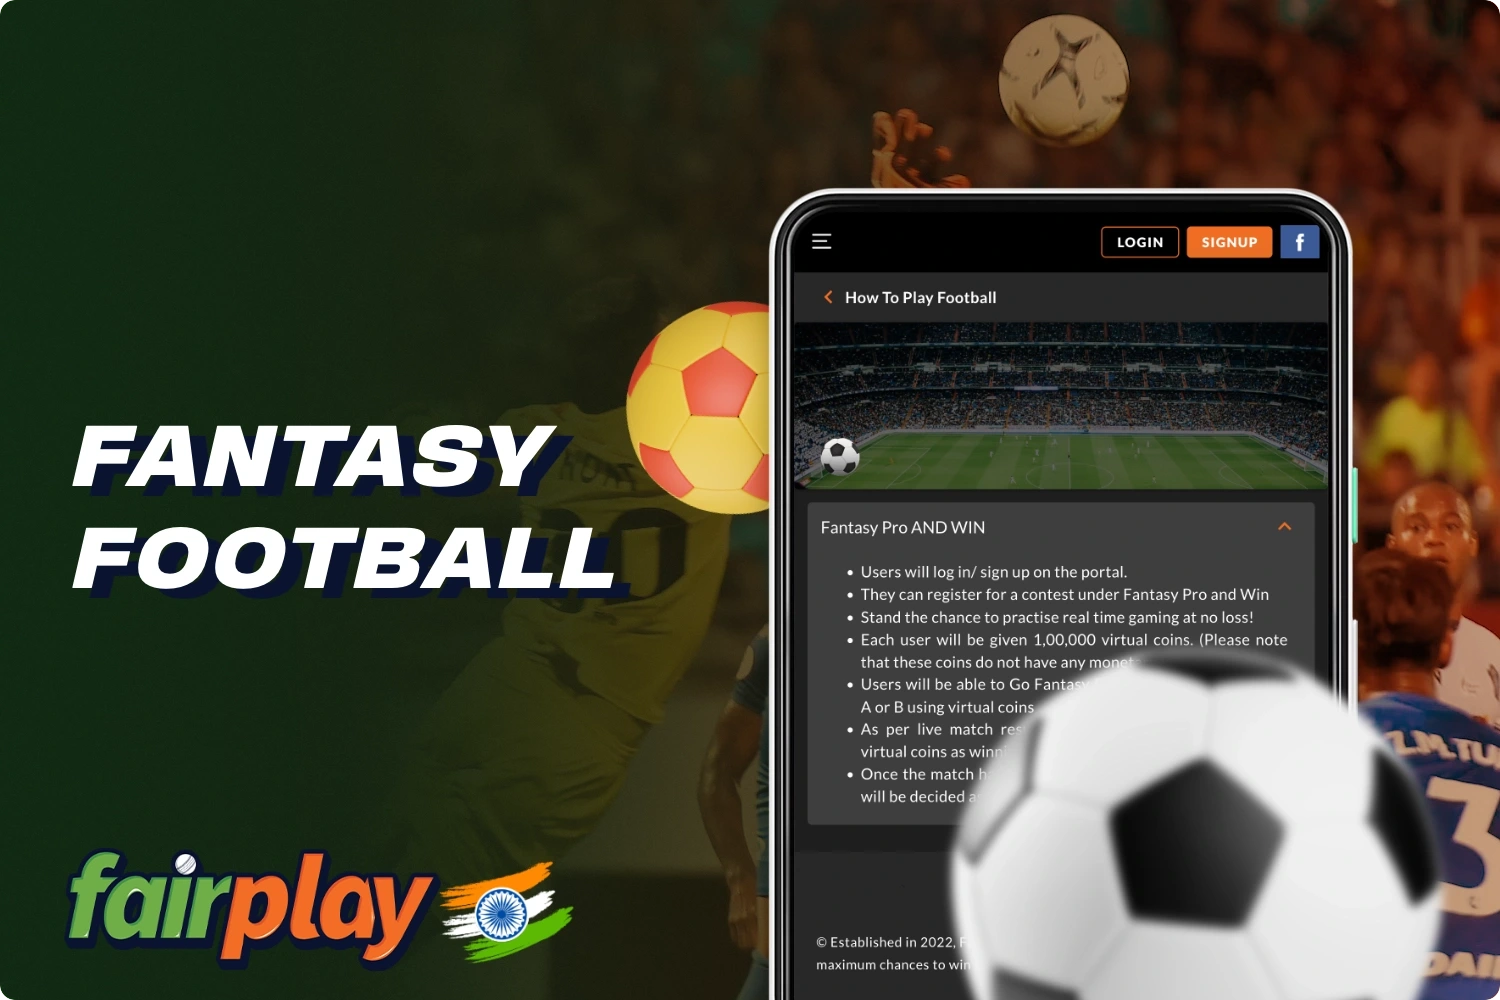 Fairplay fantasy football allows you to create your own virtual team, after which you can place bets